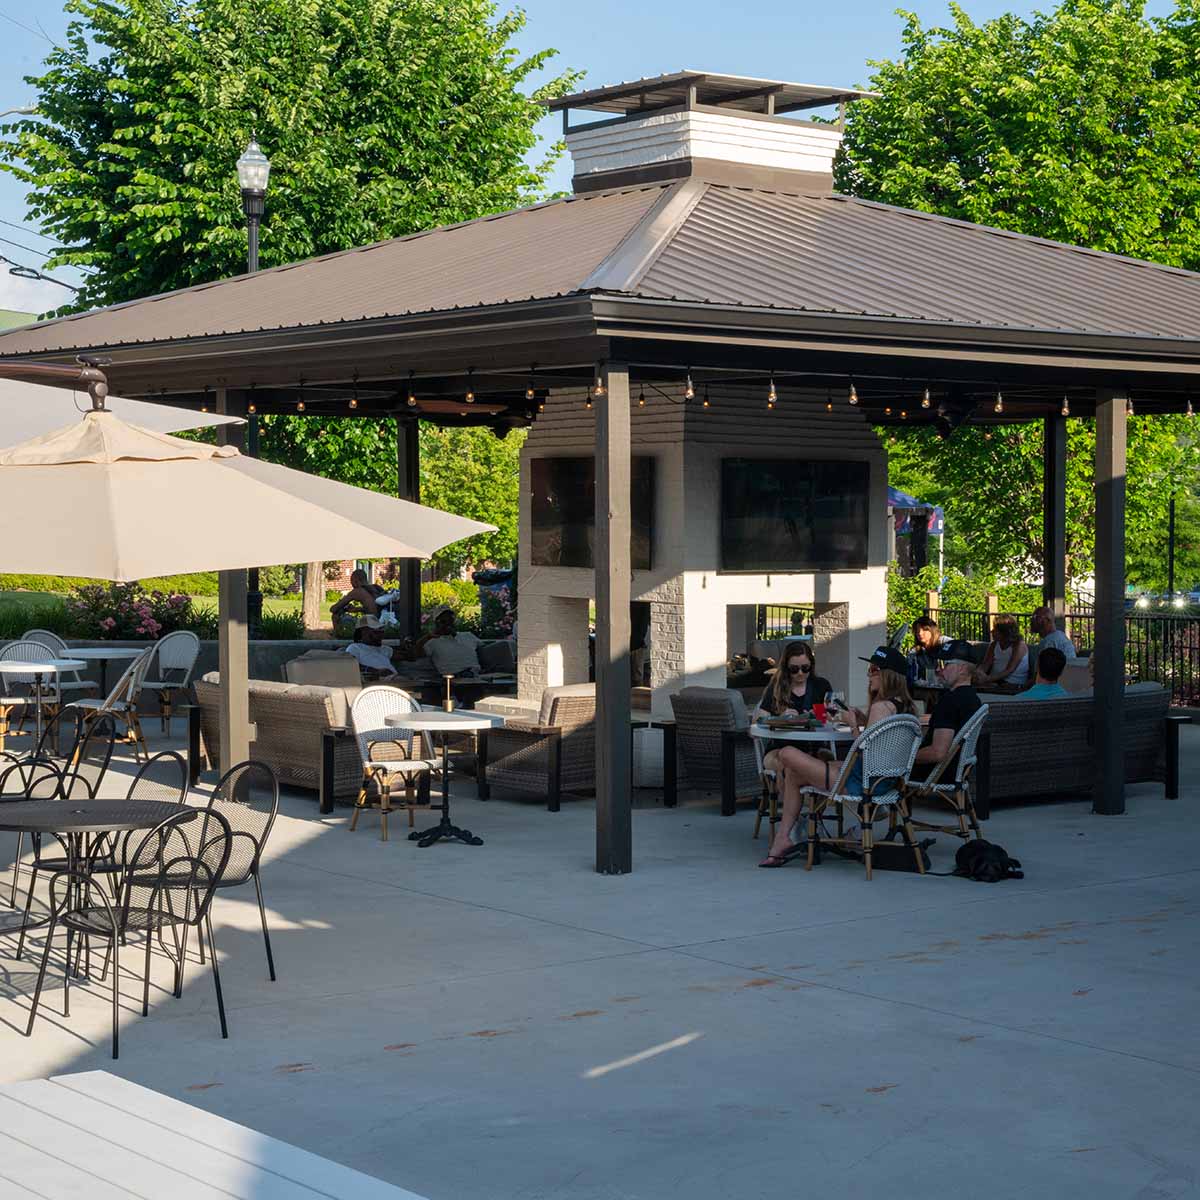 The outdoor courtyard and dining area at the Nutwood Winery downtown location in LaGrange, Georgia.